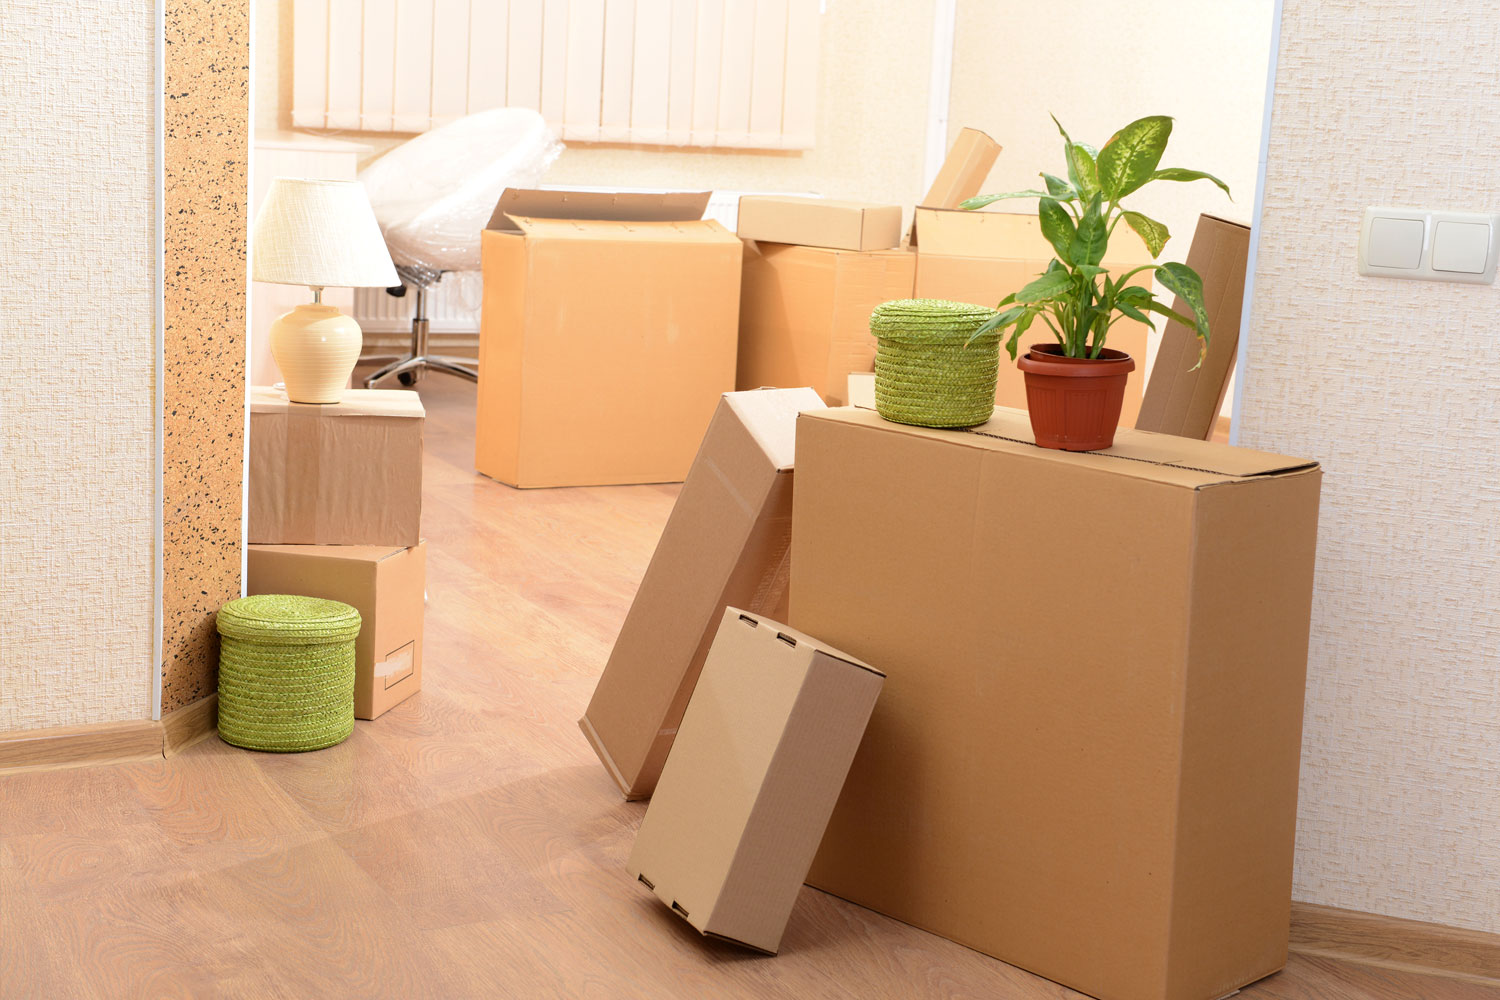 How Property Management Can Make Move-In and Move-Out Easier for You